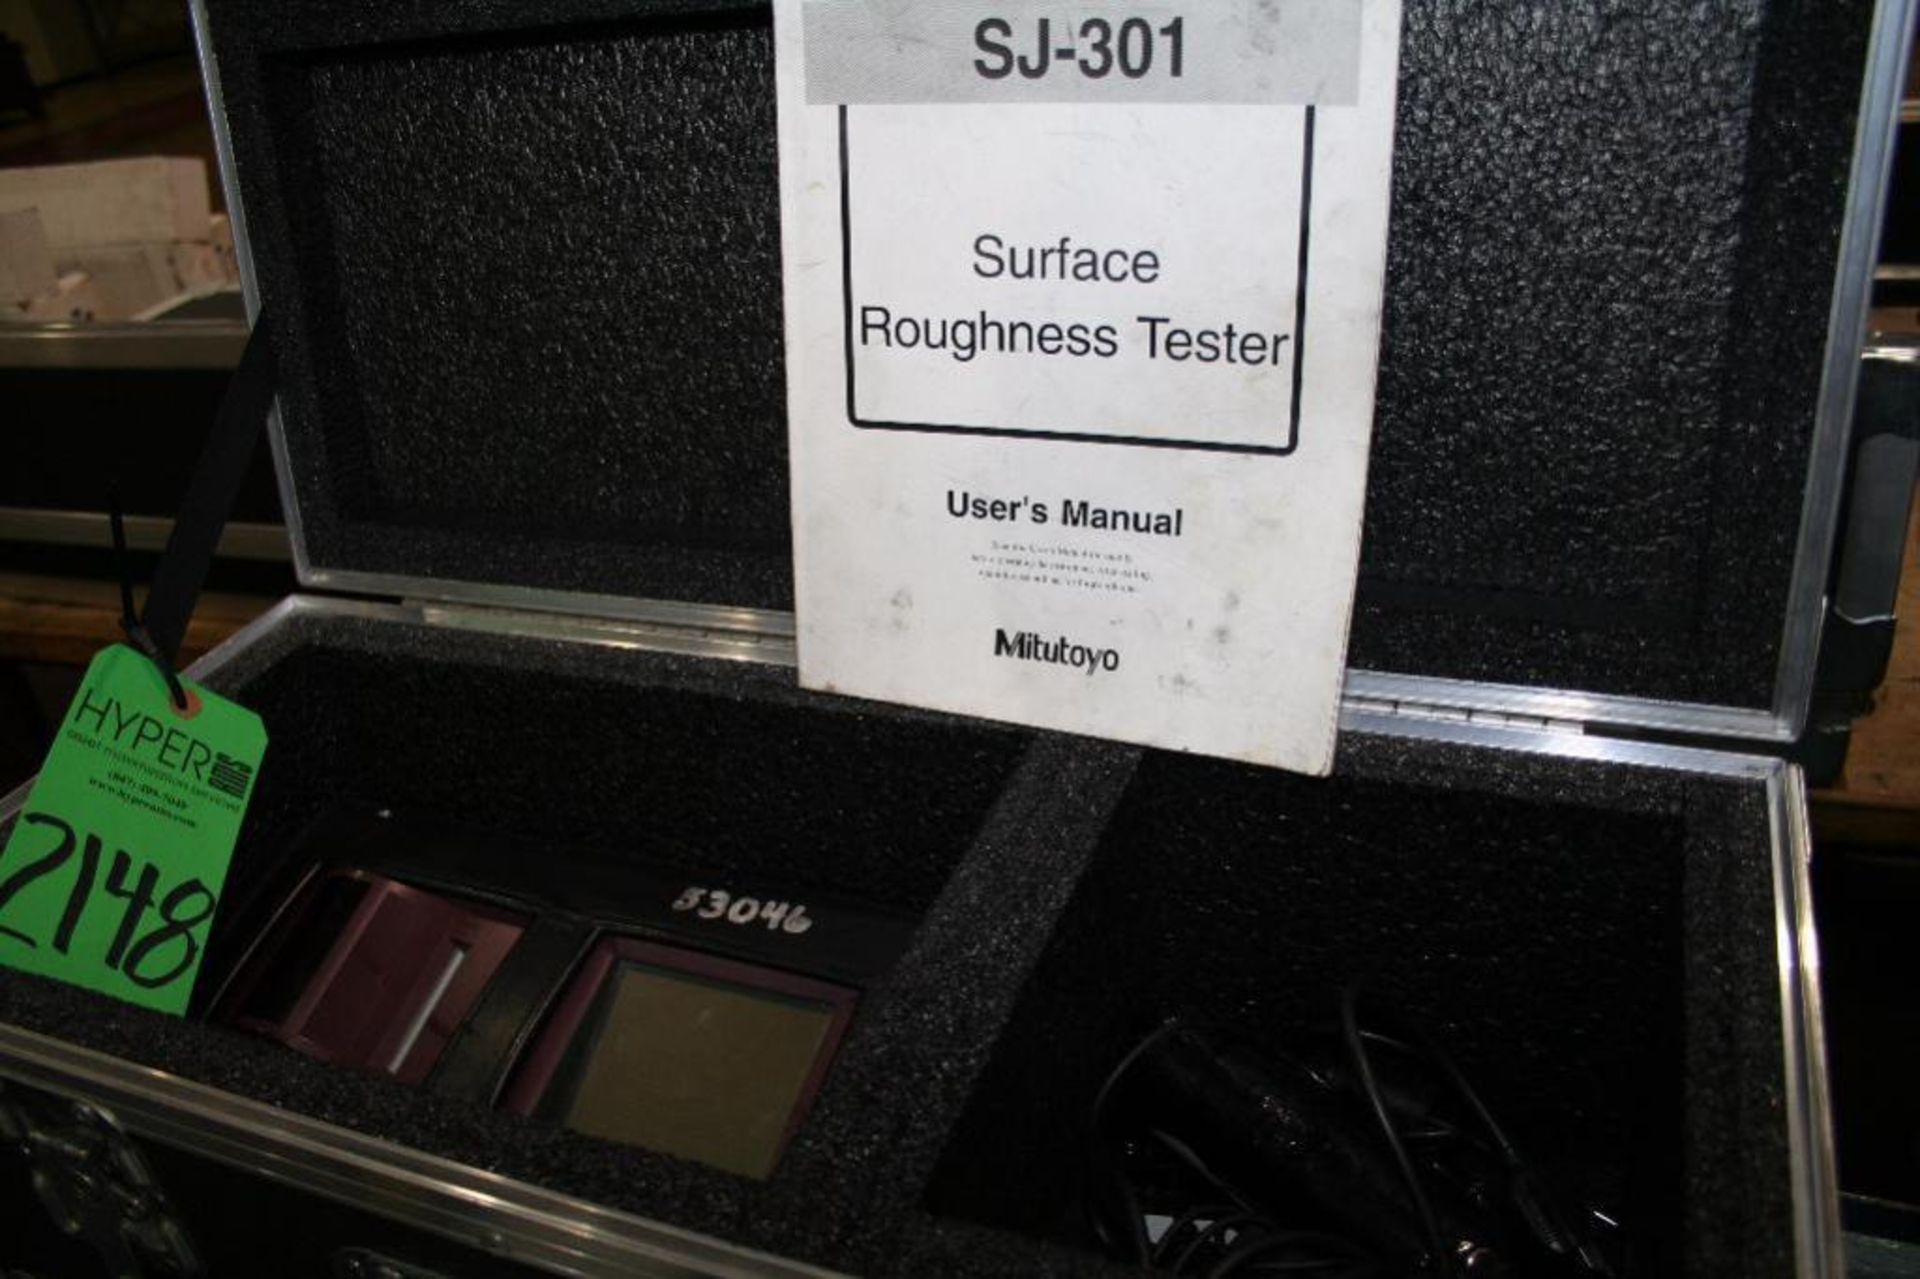 Mitutoyo Surface Roughness Tester SJ-301